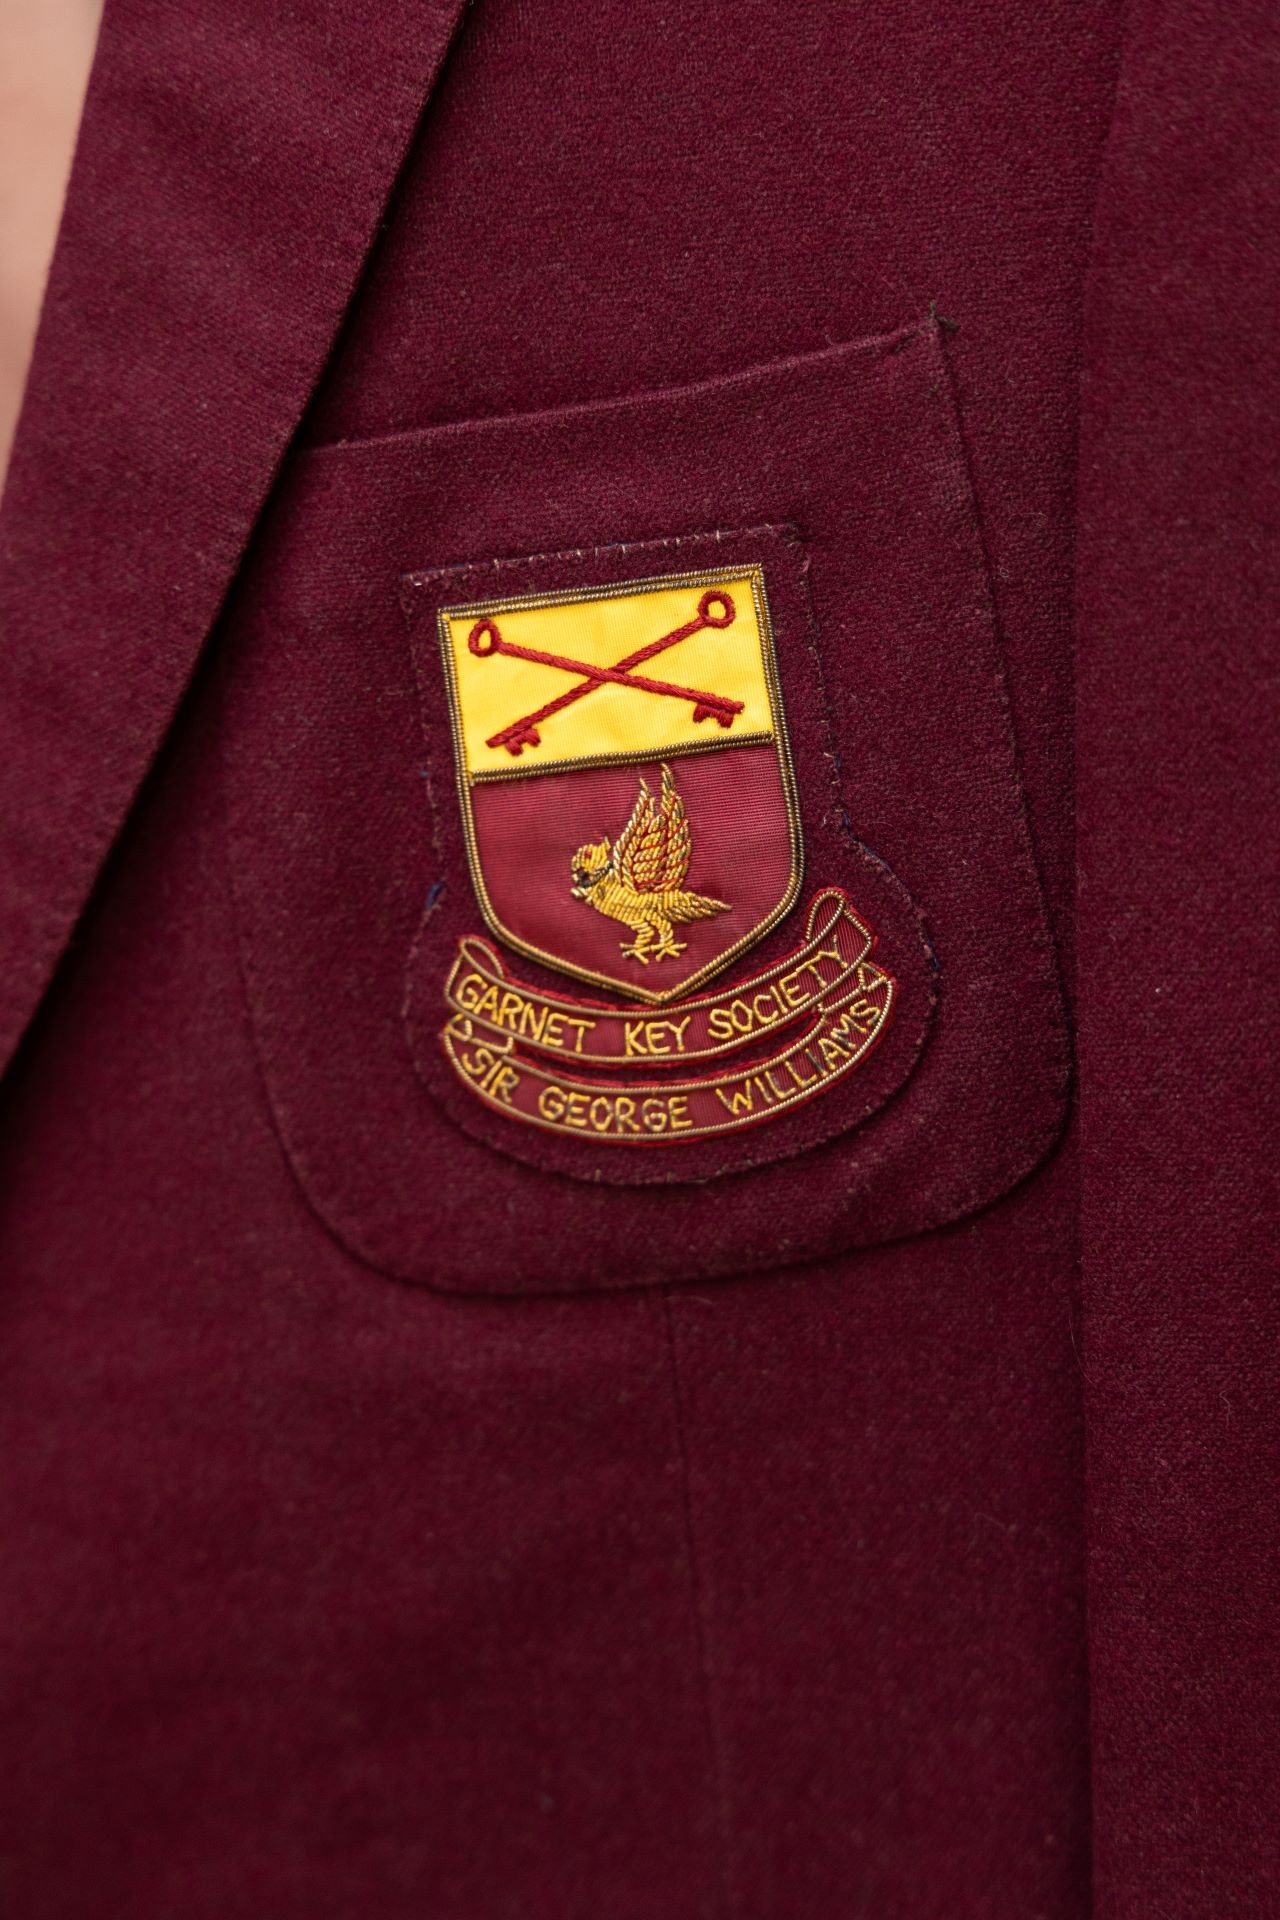 A close-up of a vintage blazer pocket featuring an embroidered patch of the Garnet Key Society from Sir George Williams University.